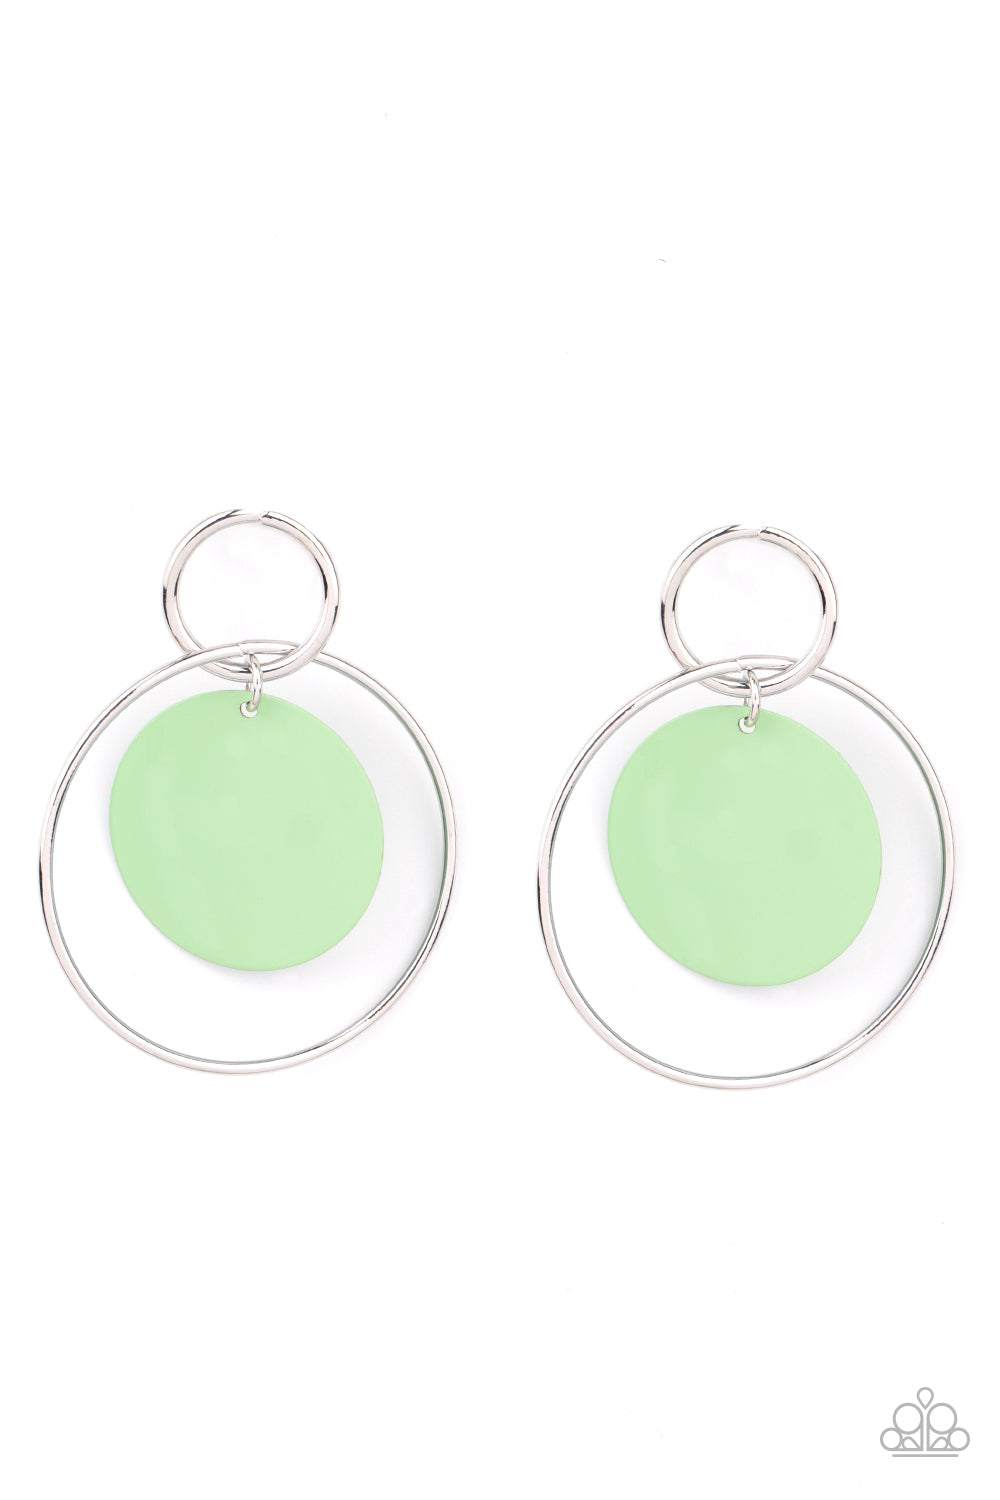 POP, Look, and Listen Green Earring - Paparazzi Accessories  A minty Green Ash disc swings from two interlocking silver hoops, creating a flirtatious pop of color. Earring attaches to a standard post fitting.  All Paparazzi Accessories are lead free and nickel free!  Sold as one pair of post earrings.